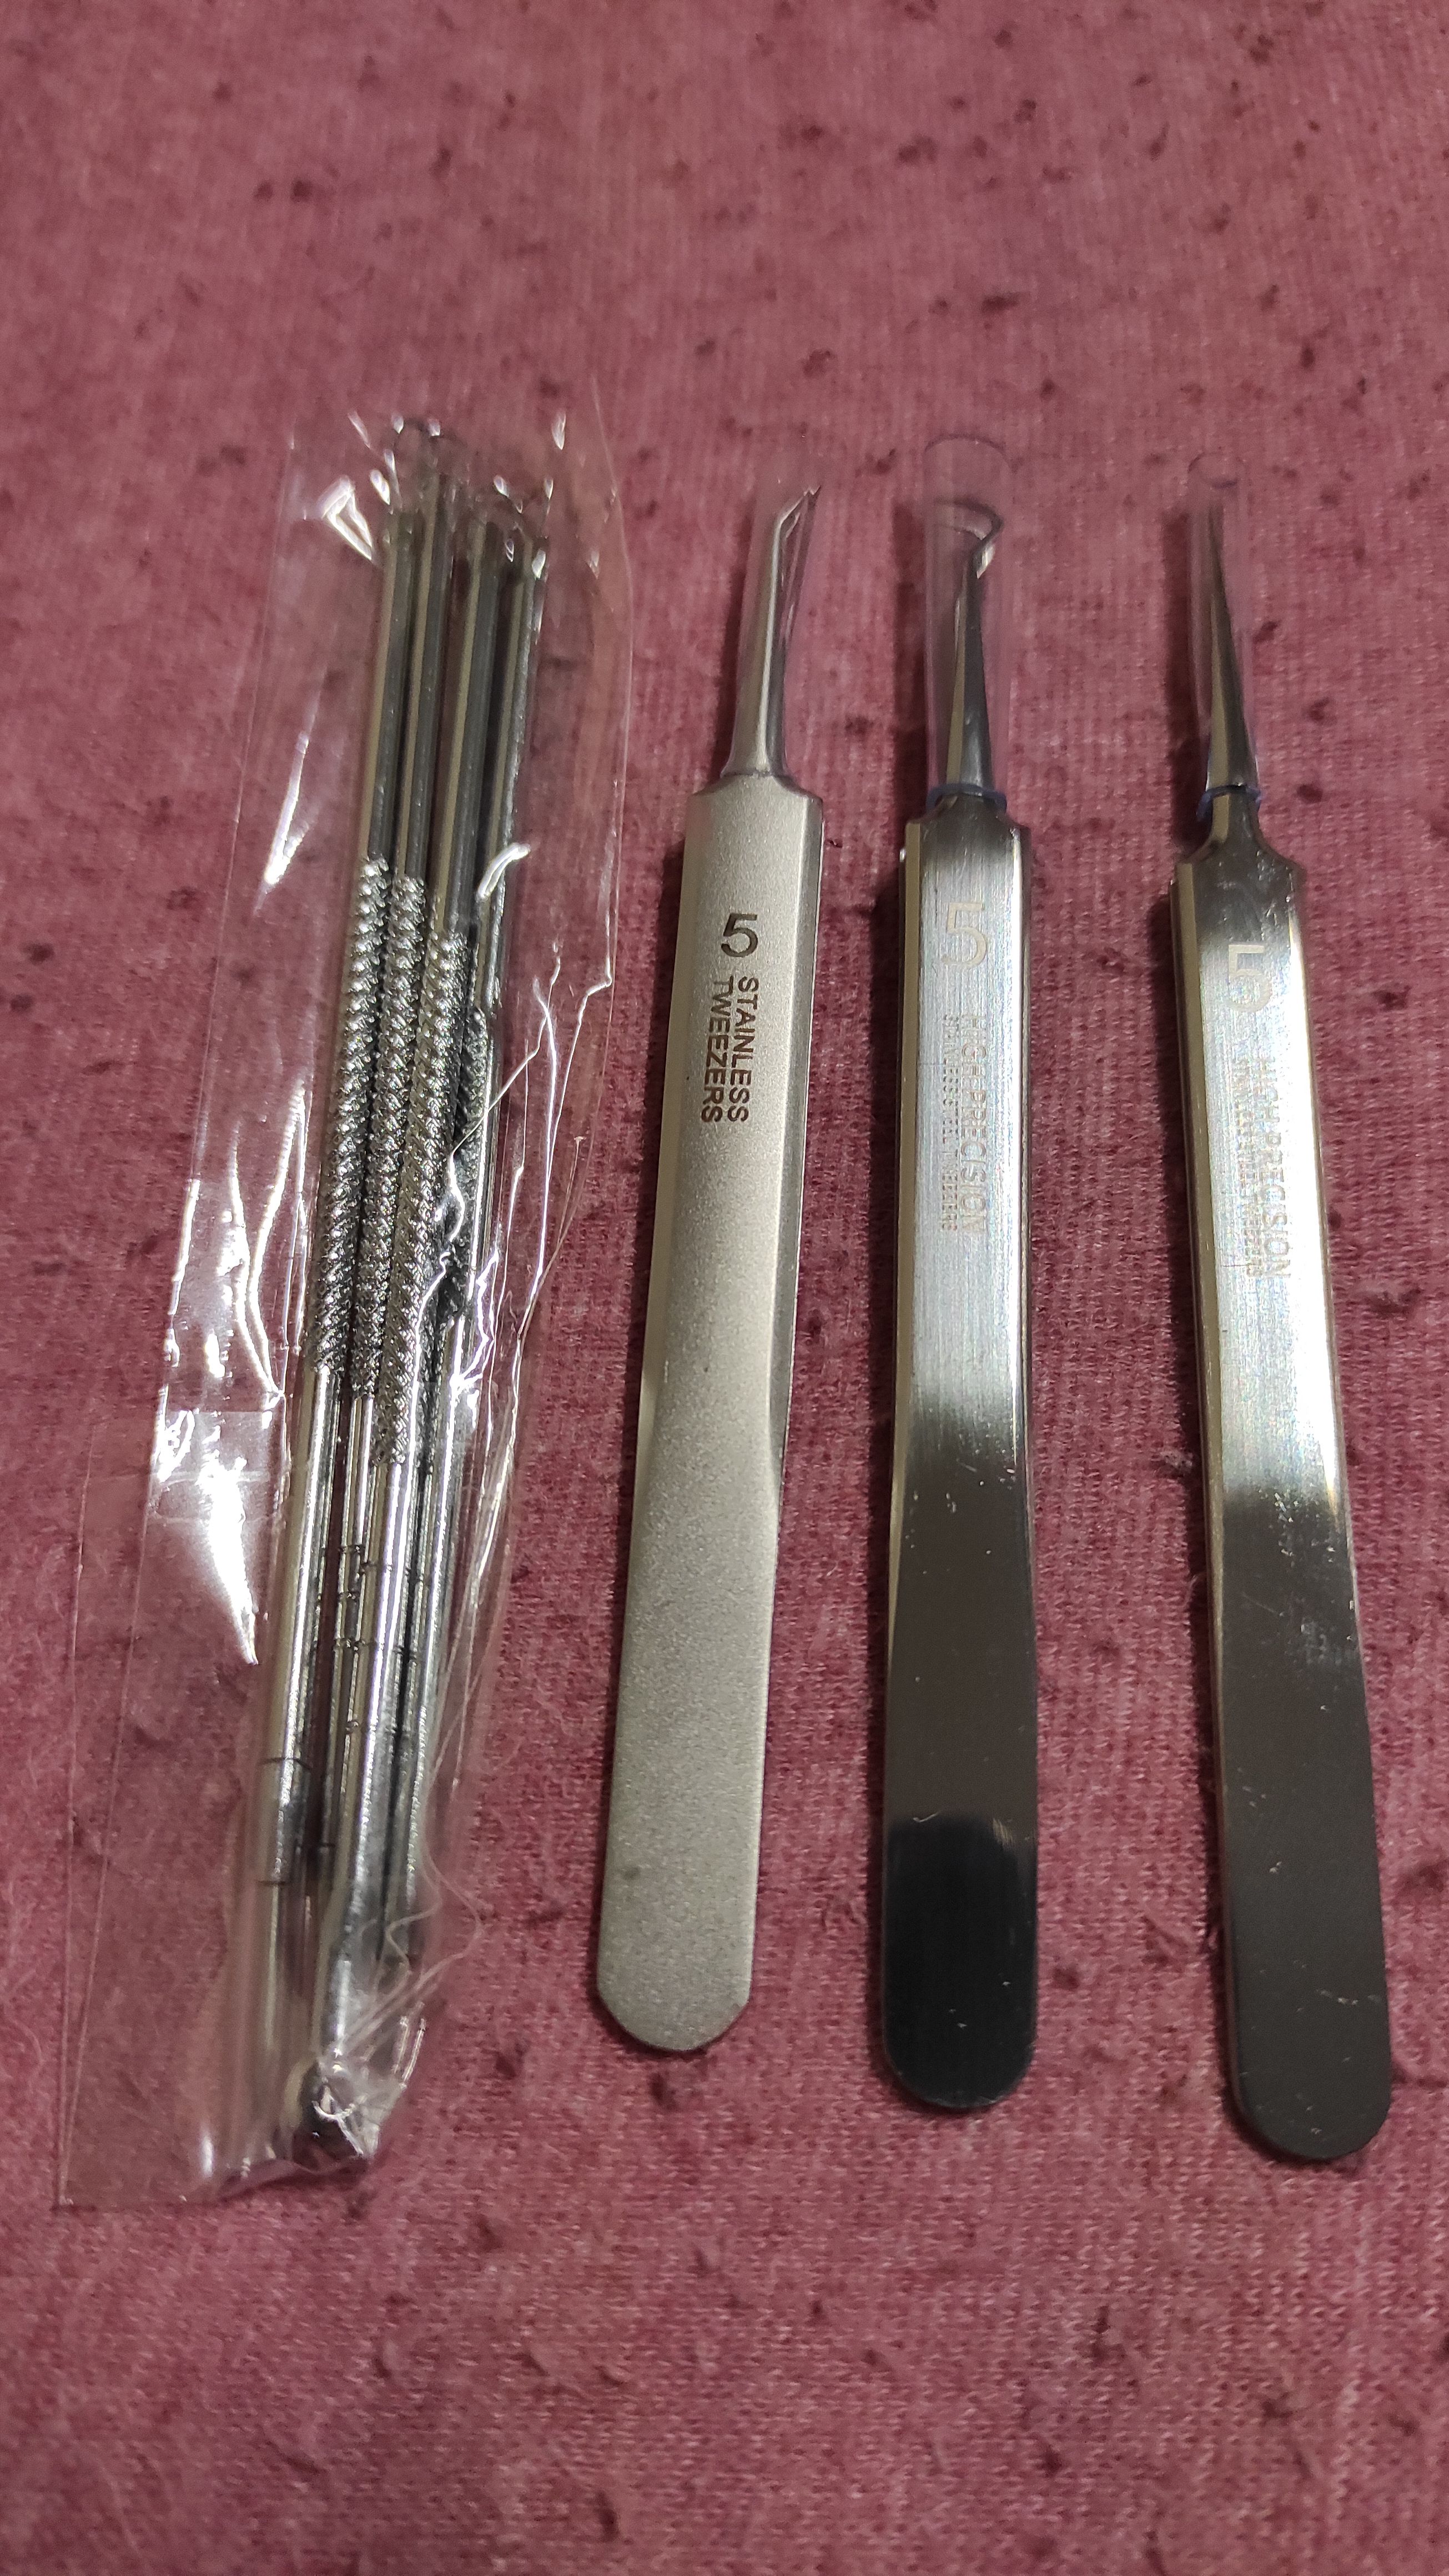 Blackhead Remover Acne Needle Tool for Face Beauty Salon photo review